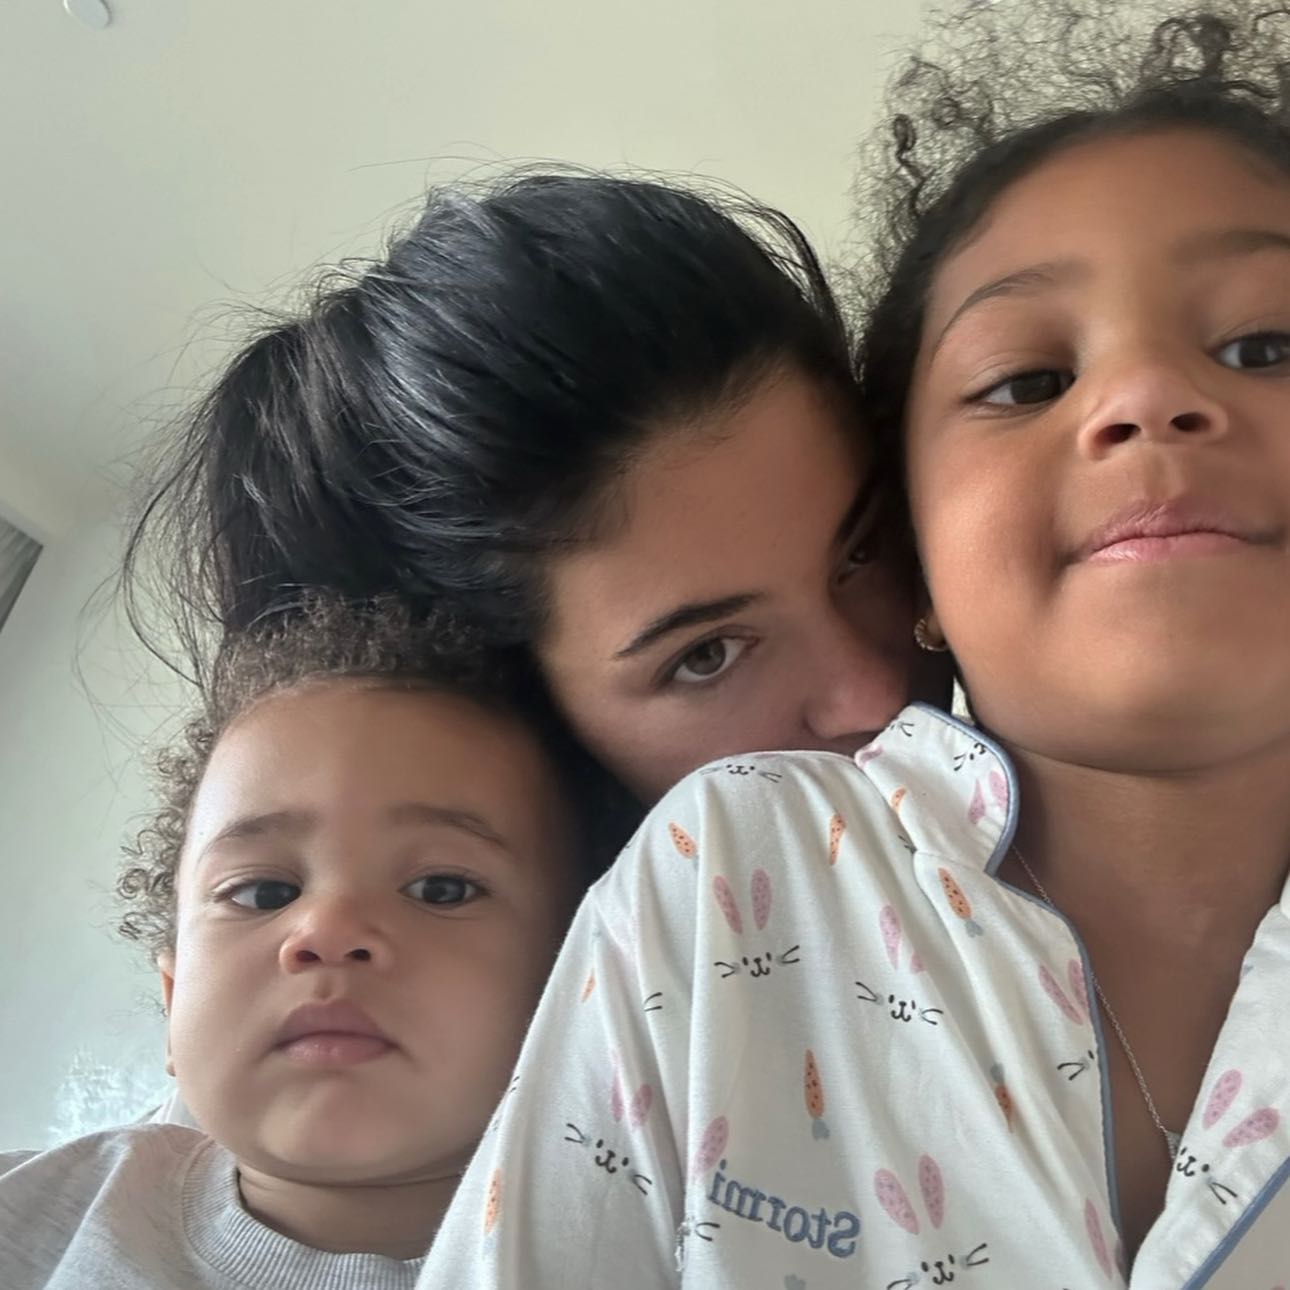 Travis and ex Kylie Jenner share two kids, Aire and Stormi